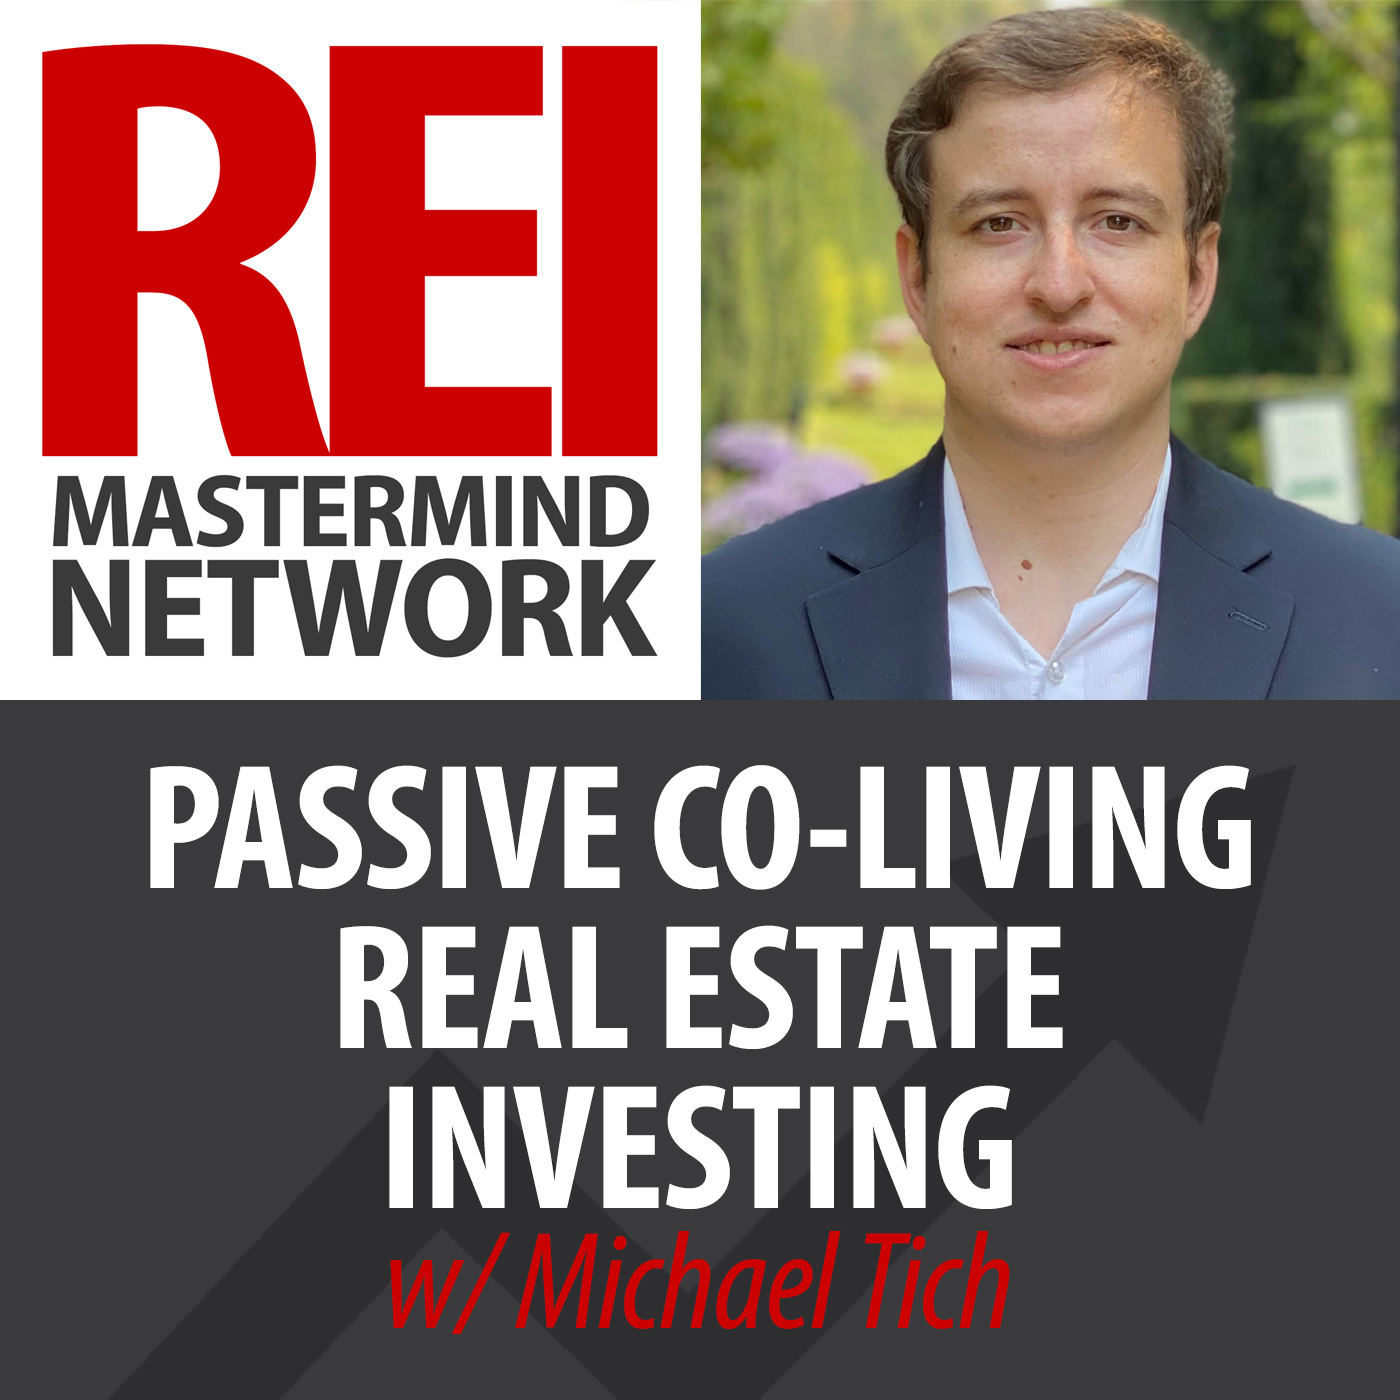 Passive Co-Living Real Estate Investing with Michael Tich Image